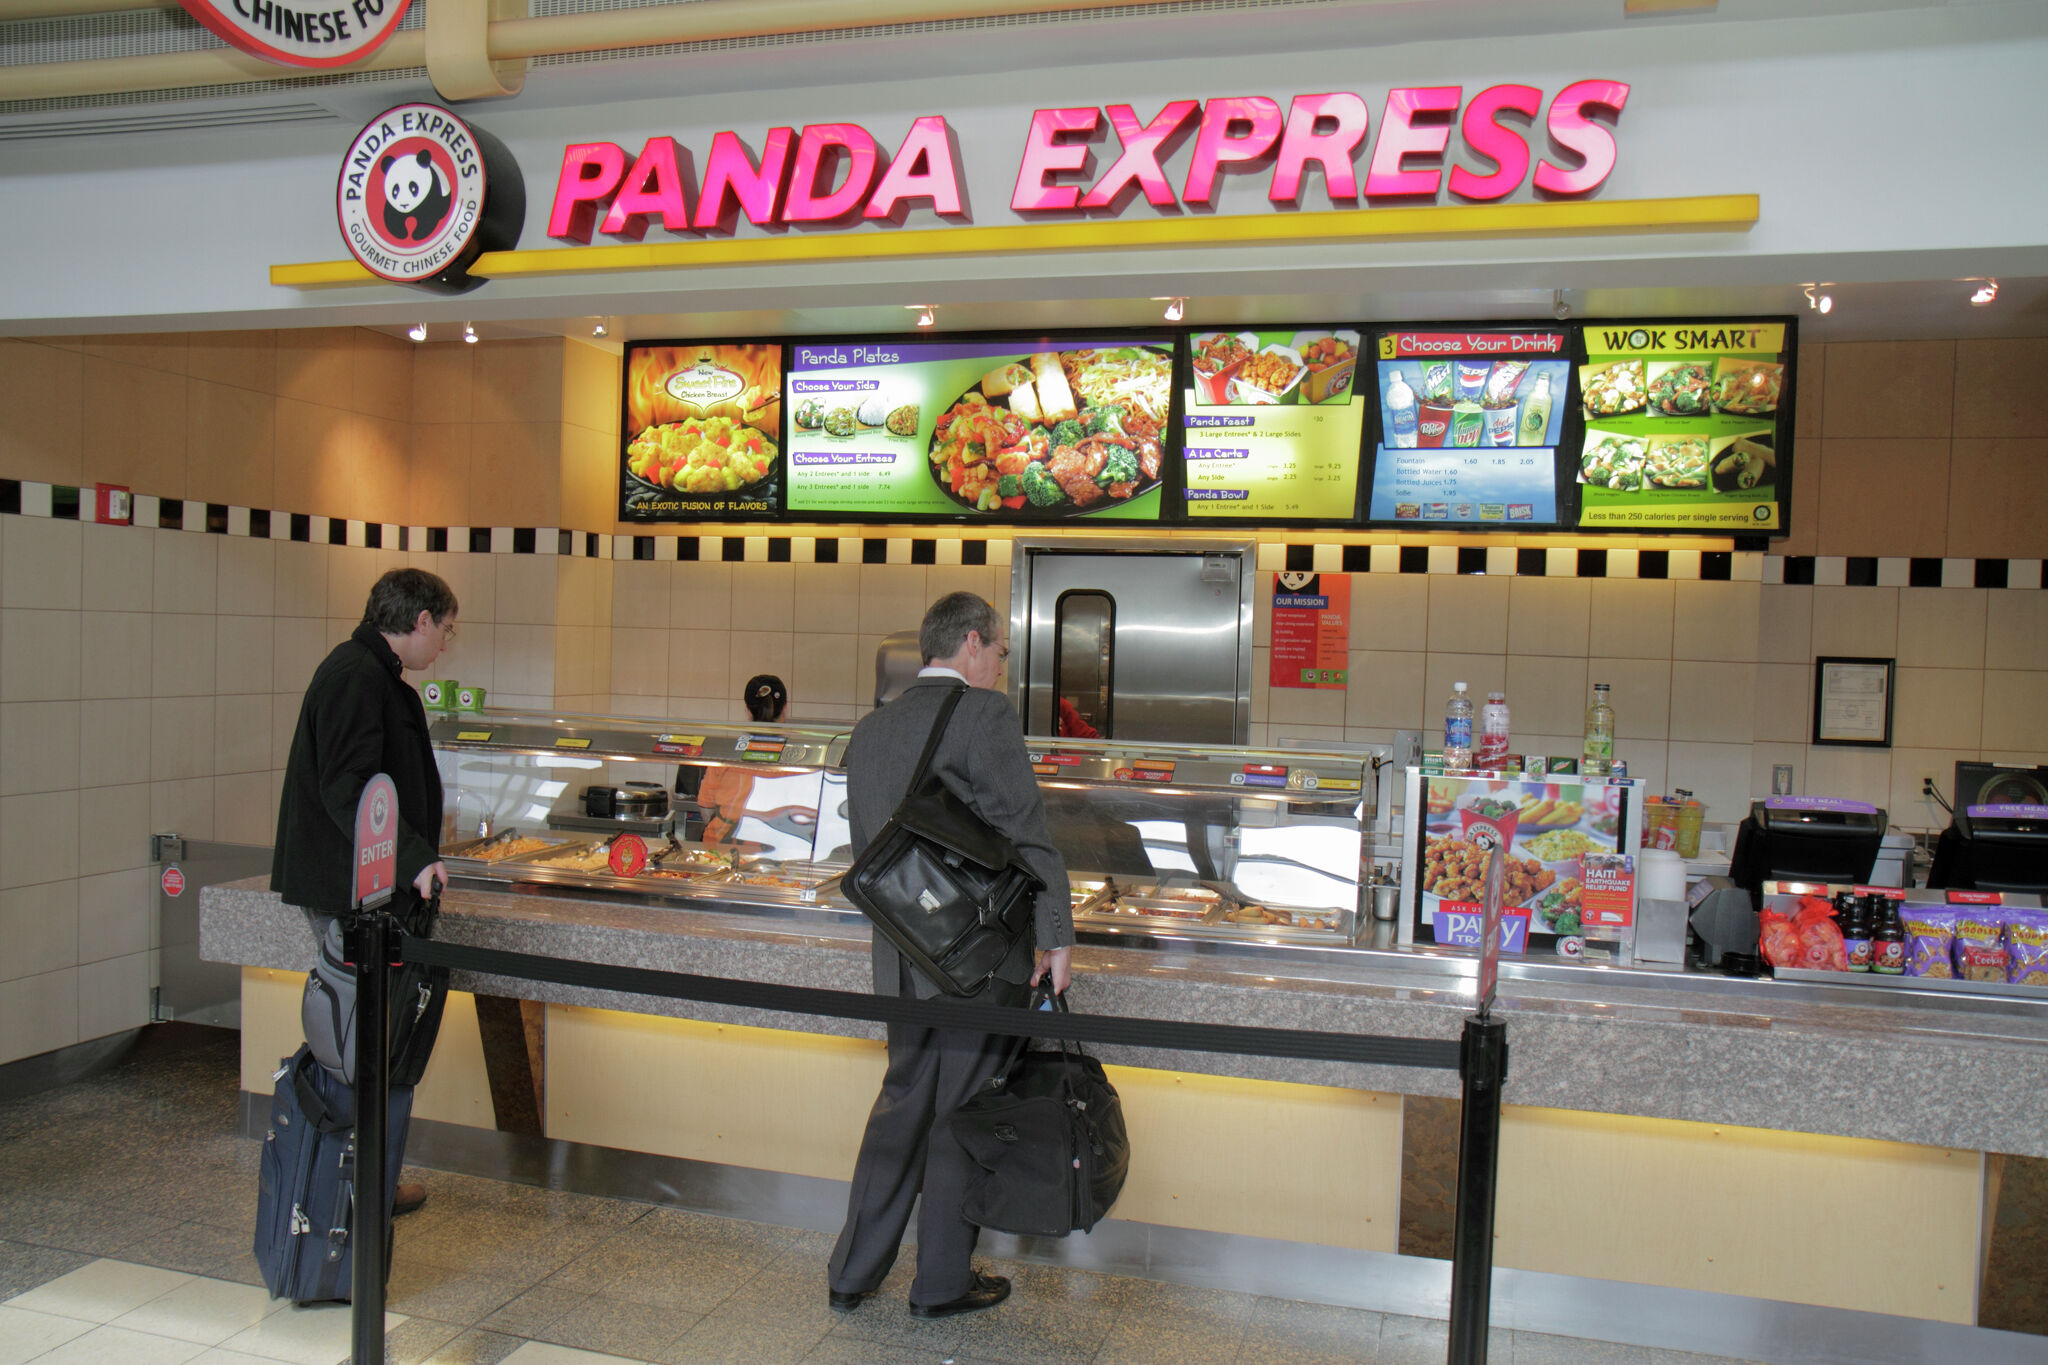 Panda Express threatened to sue Calif. eatery over its name